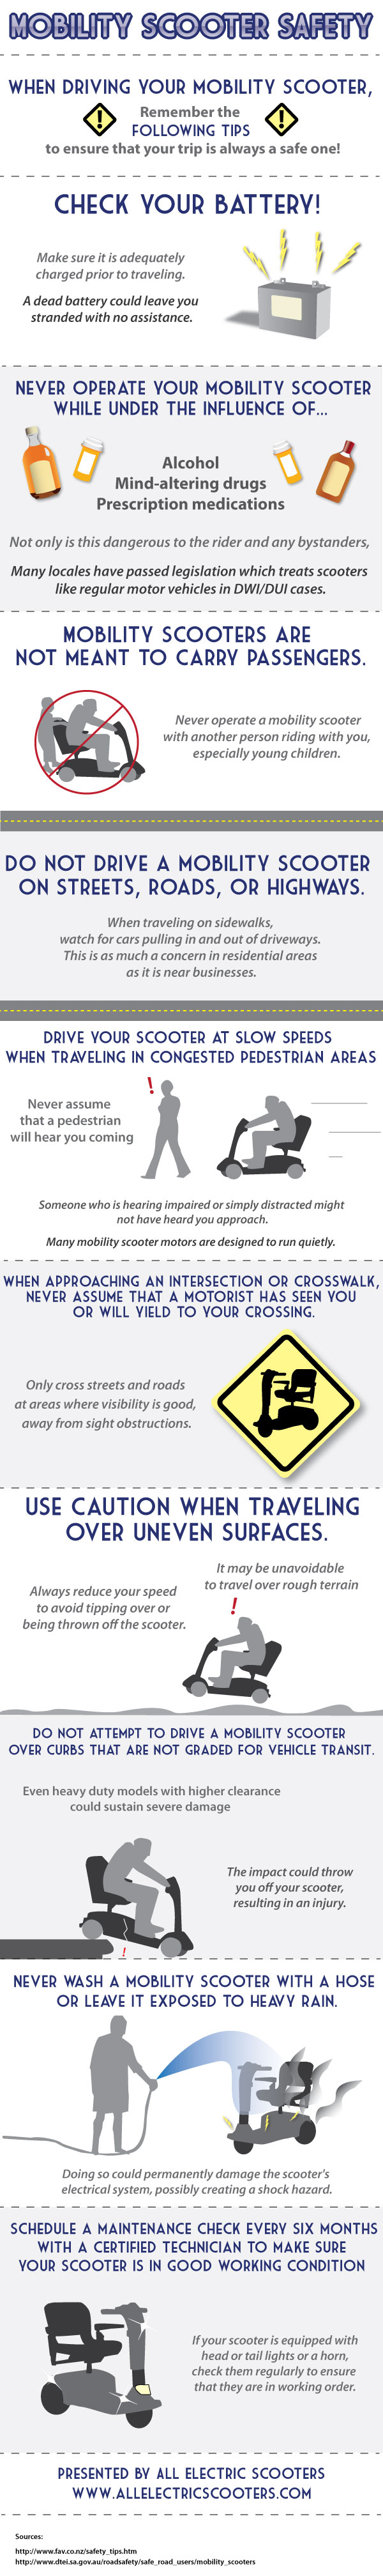 Mobility Scooter Safety Infographic